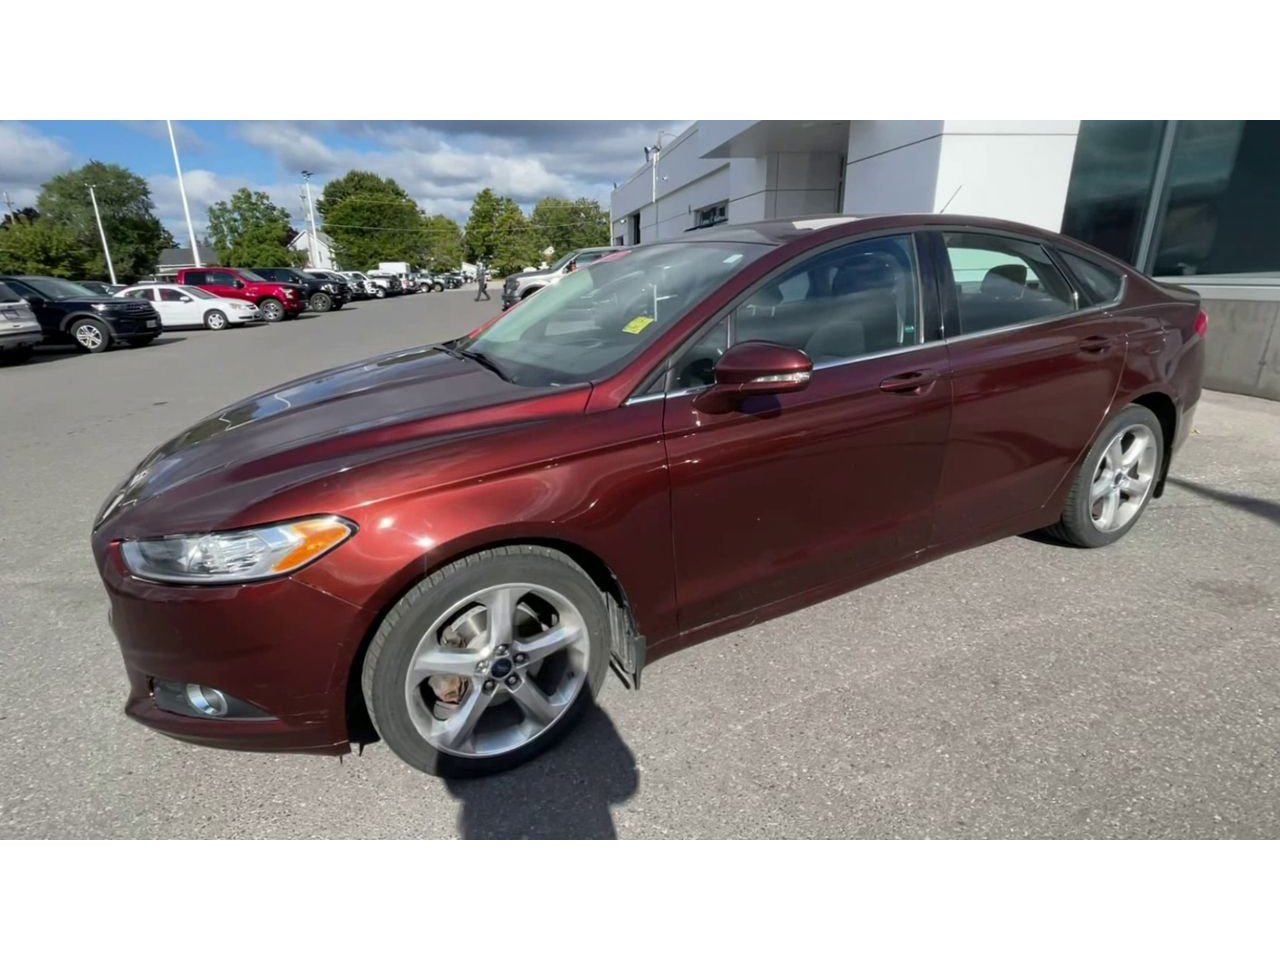 2016 Ford Fusion - P21337 Full Image 4